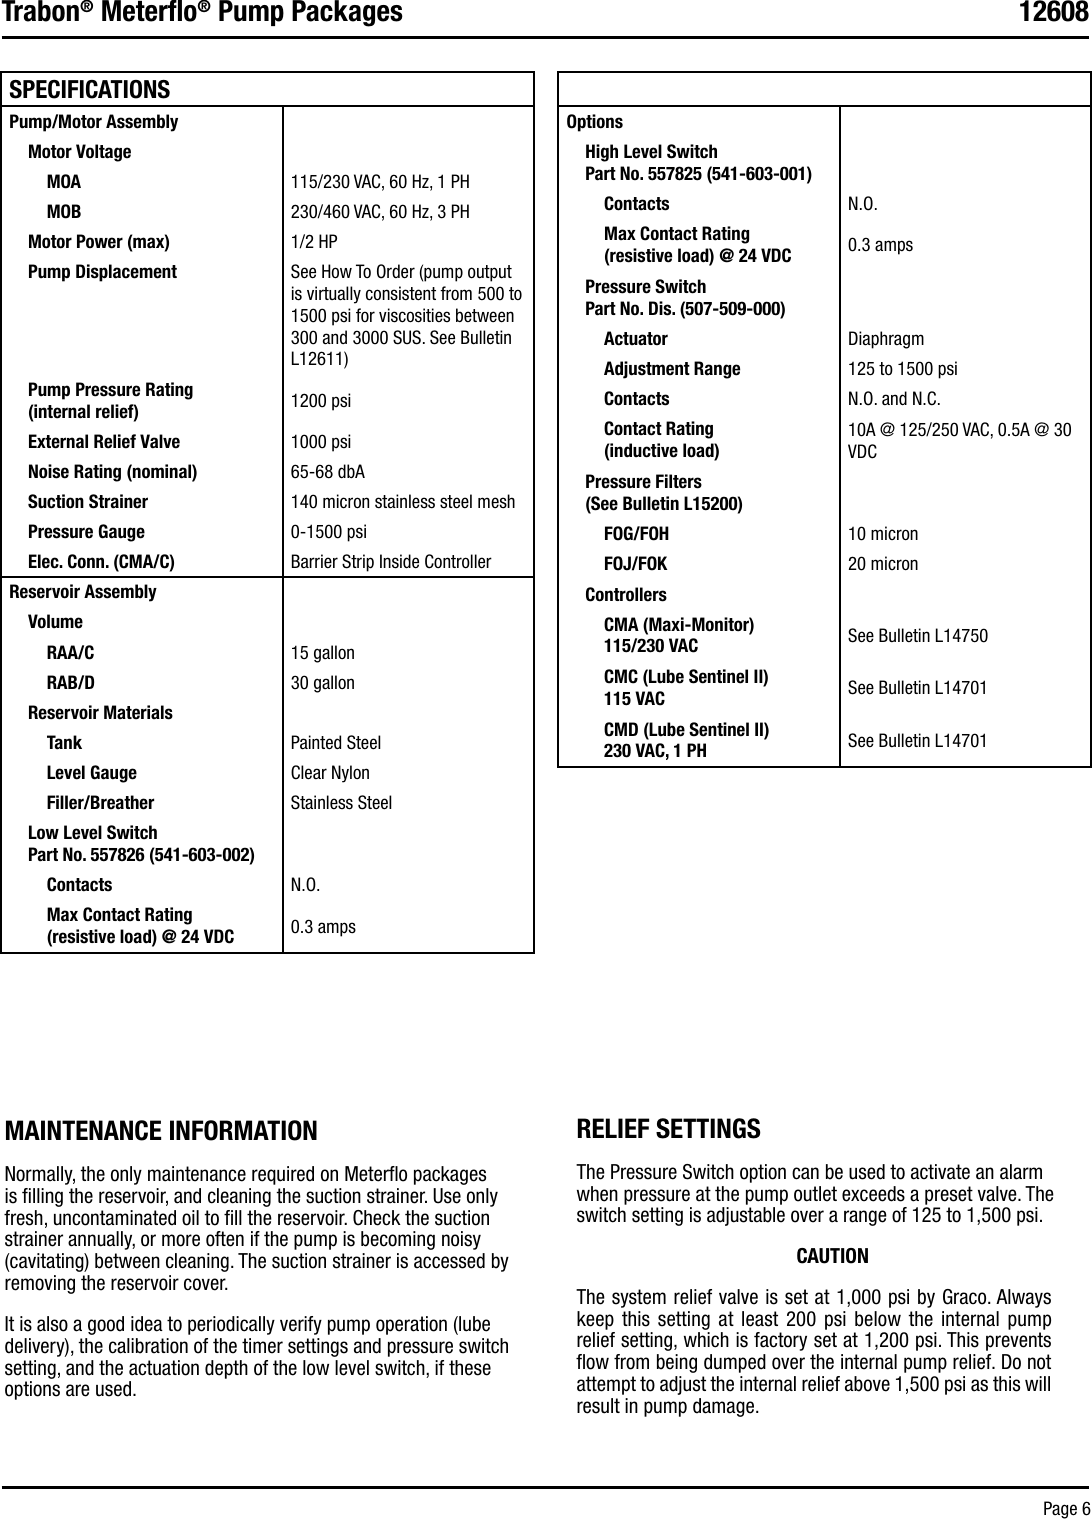 Page 6 of 8 - Graco Graco-Meter-Flo-Pump-Packages-Users-Manual-  Graco-meter-flo-pump-packages-users-manual